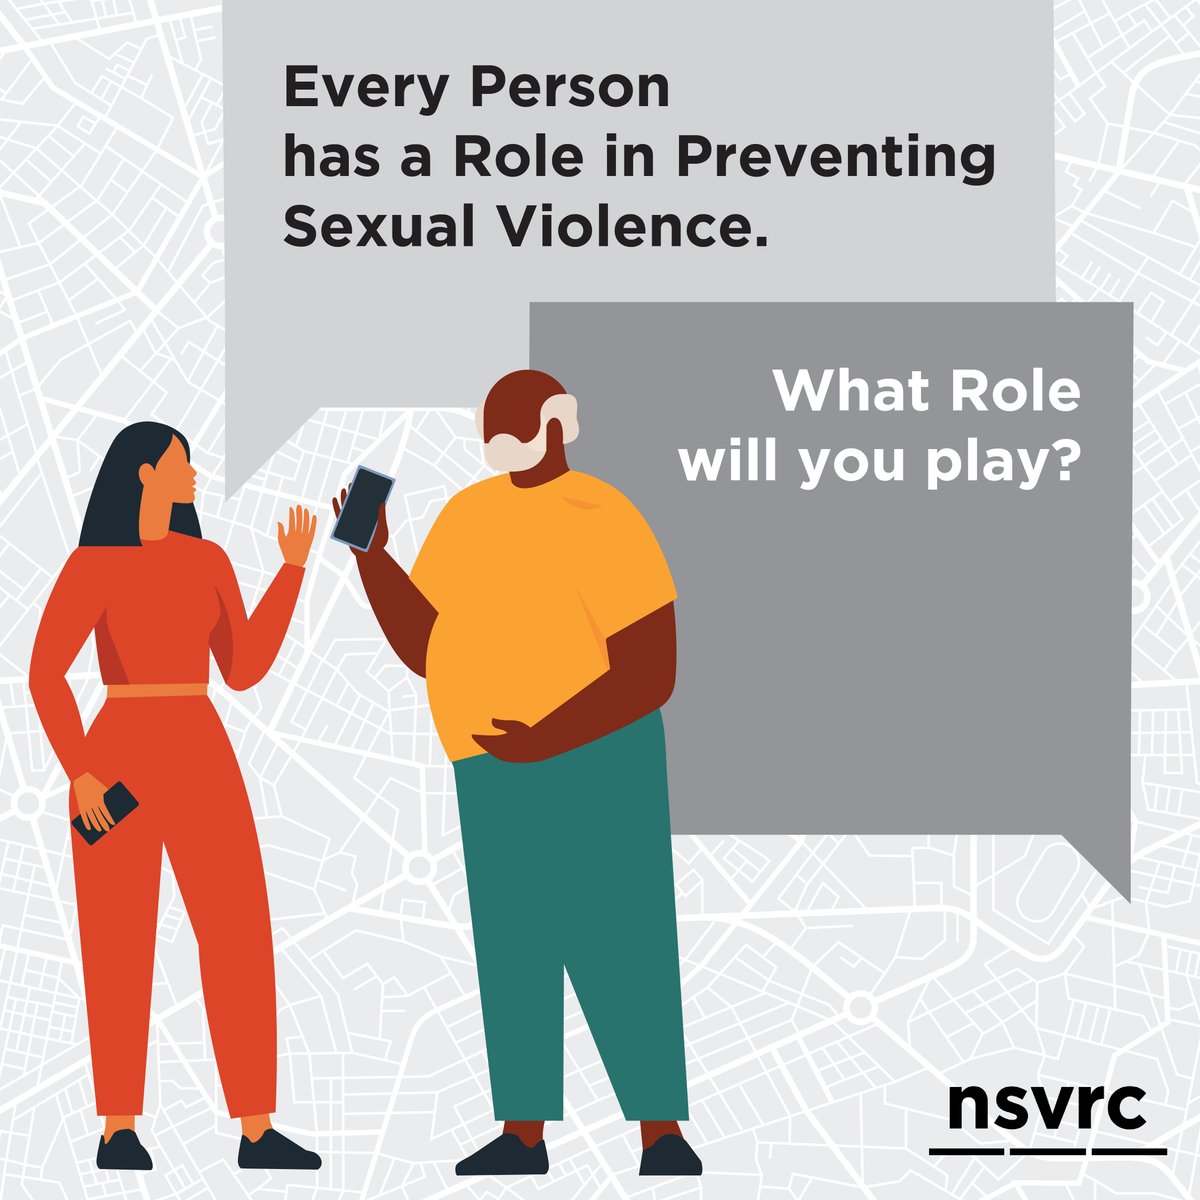 April is Sexual Assault Awareness Month (SAAM). We all have a role in preventing sexual violence. Visit nsvrc.org/saam to learn how to help. #SAAM #SexualViolence #PreventViolence